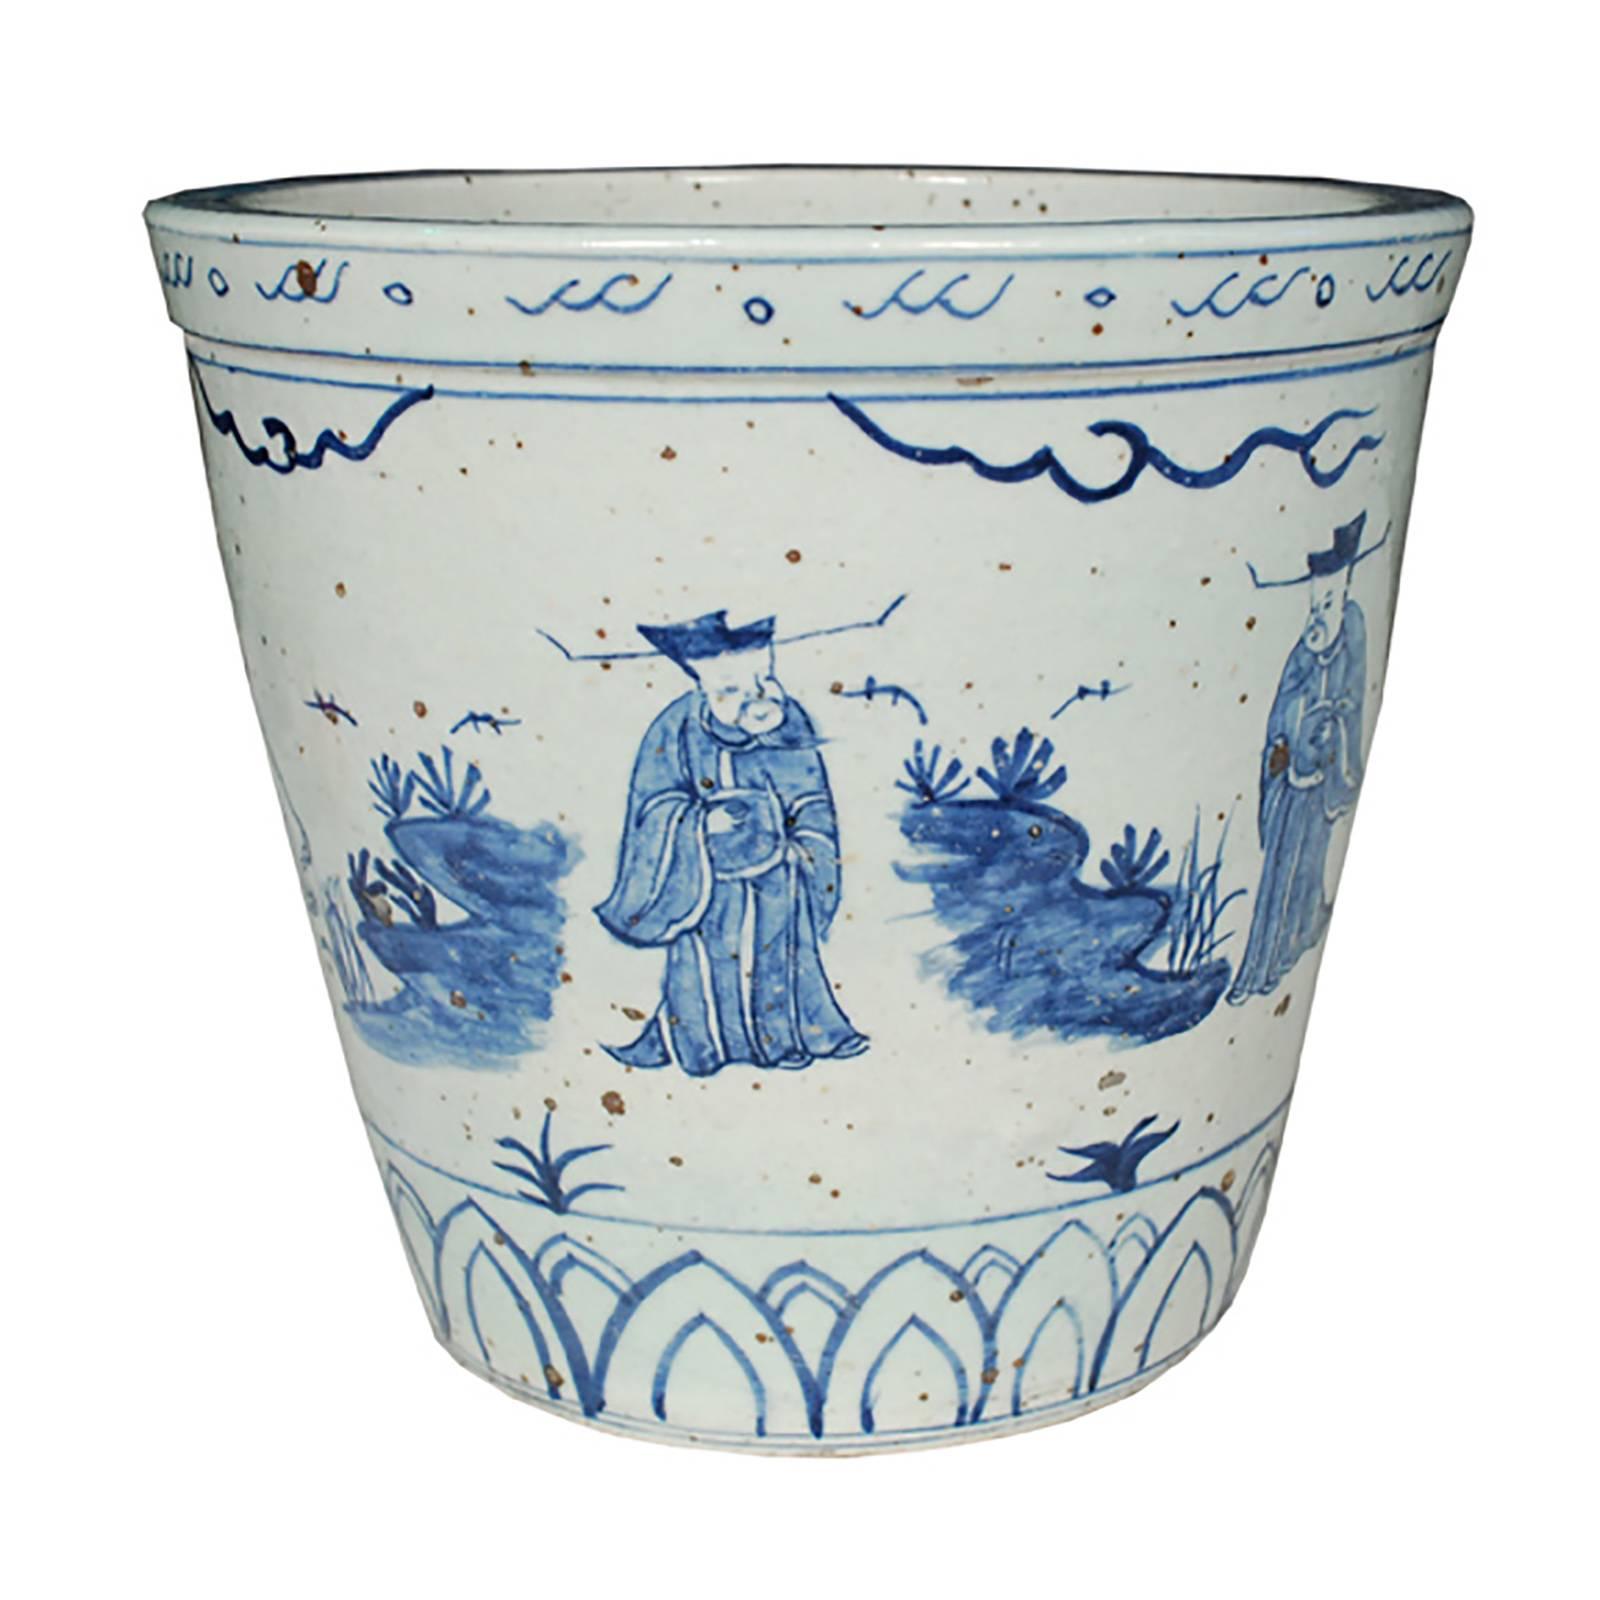 This unique pot was made by hand in southern China and is a wonderful example of blue and white ceramics that are sought worldwide by collectors. The scene wraps around the entire pot and is painted in rich blue feathery brushstrokes. The figures